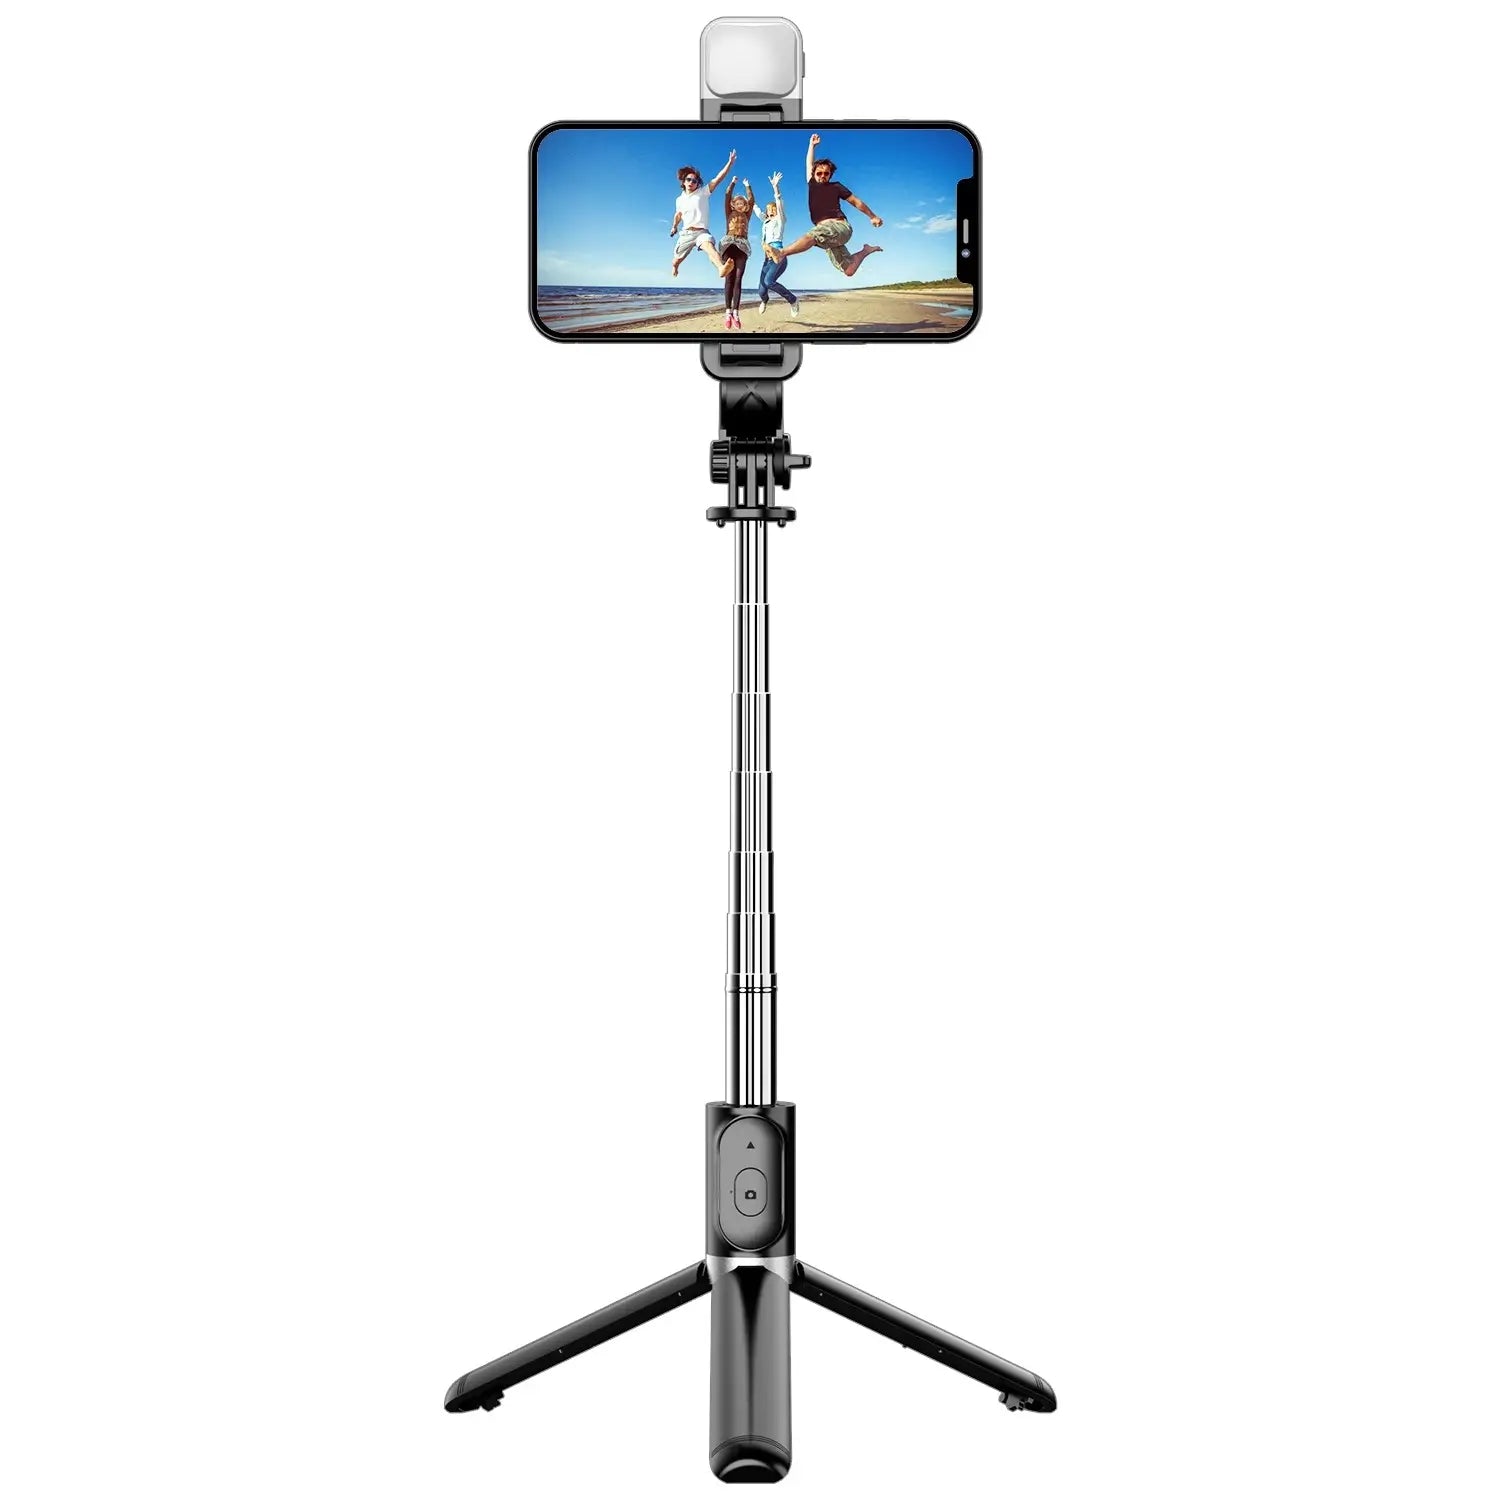 Flexible Portable Tripod with LED Light, Bluetooth, USB Charging: Your Ultimate Selfie Solution!